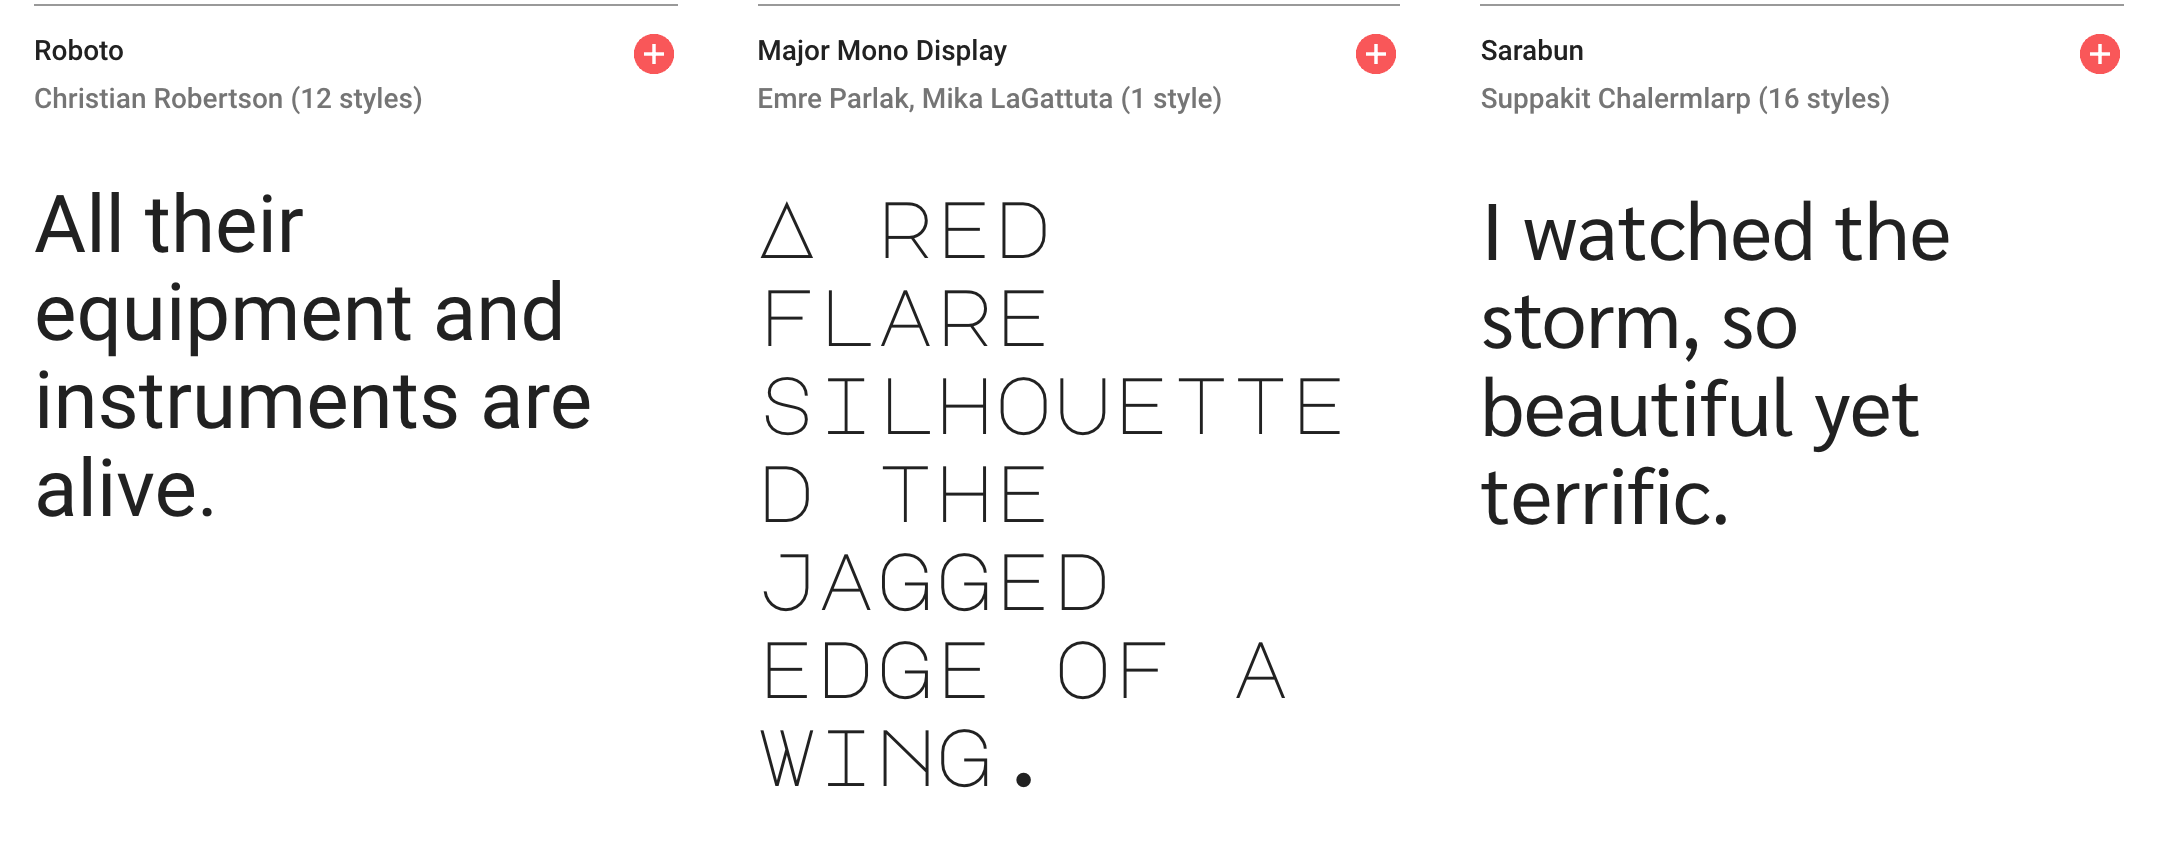 free arial font for mac